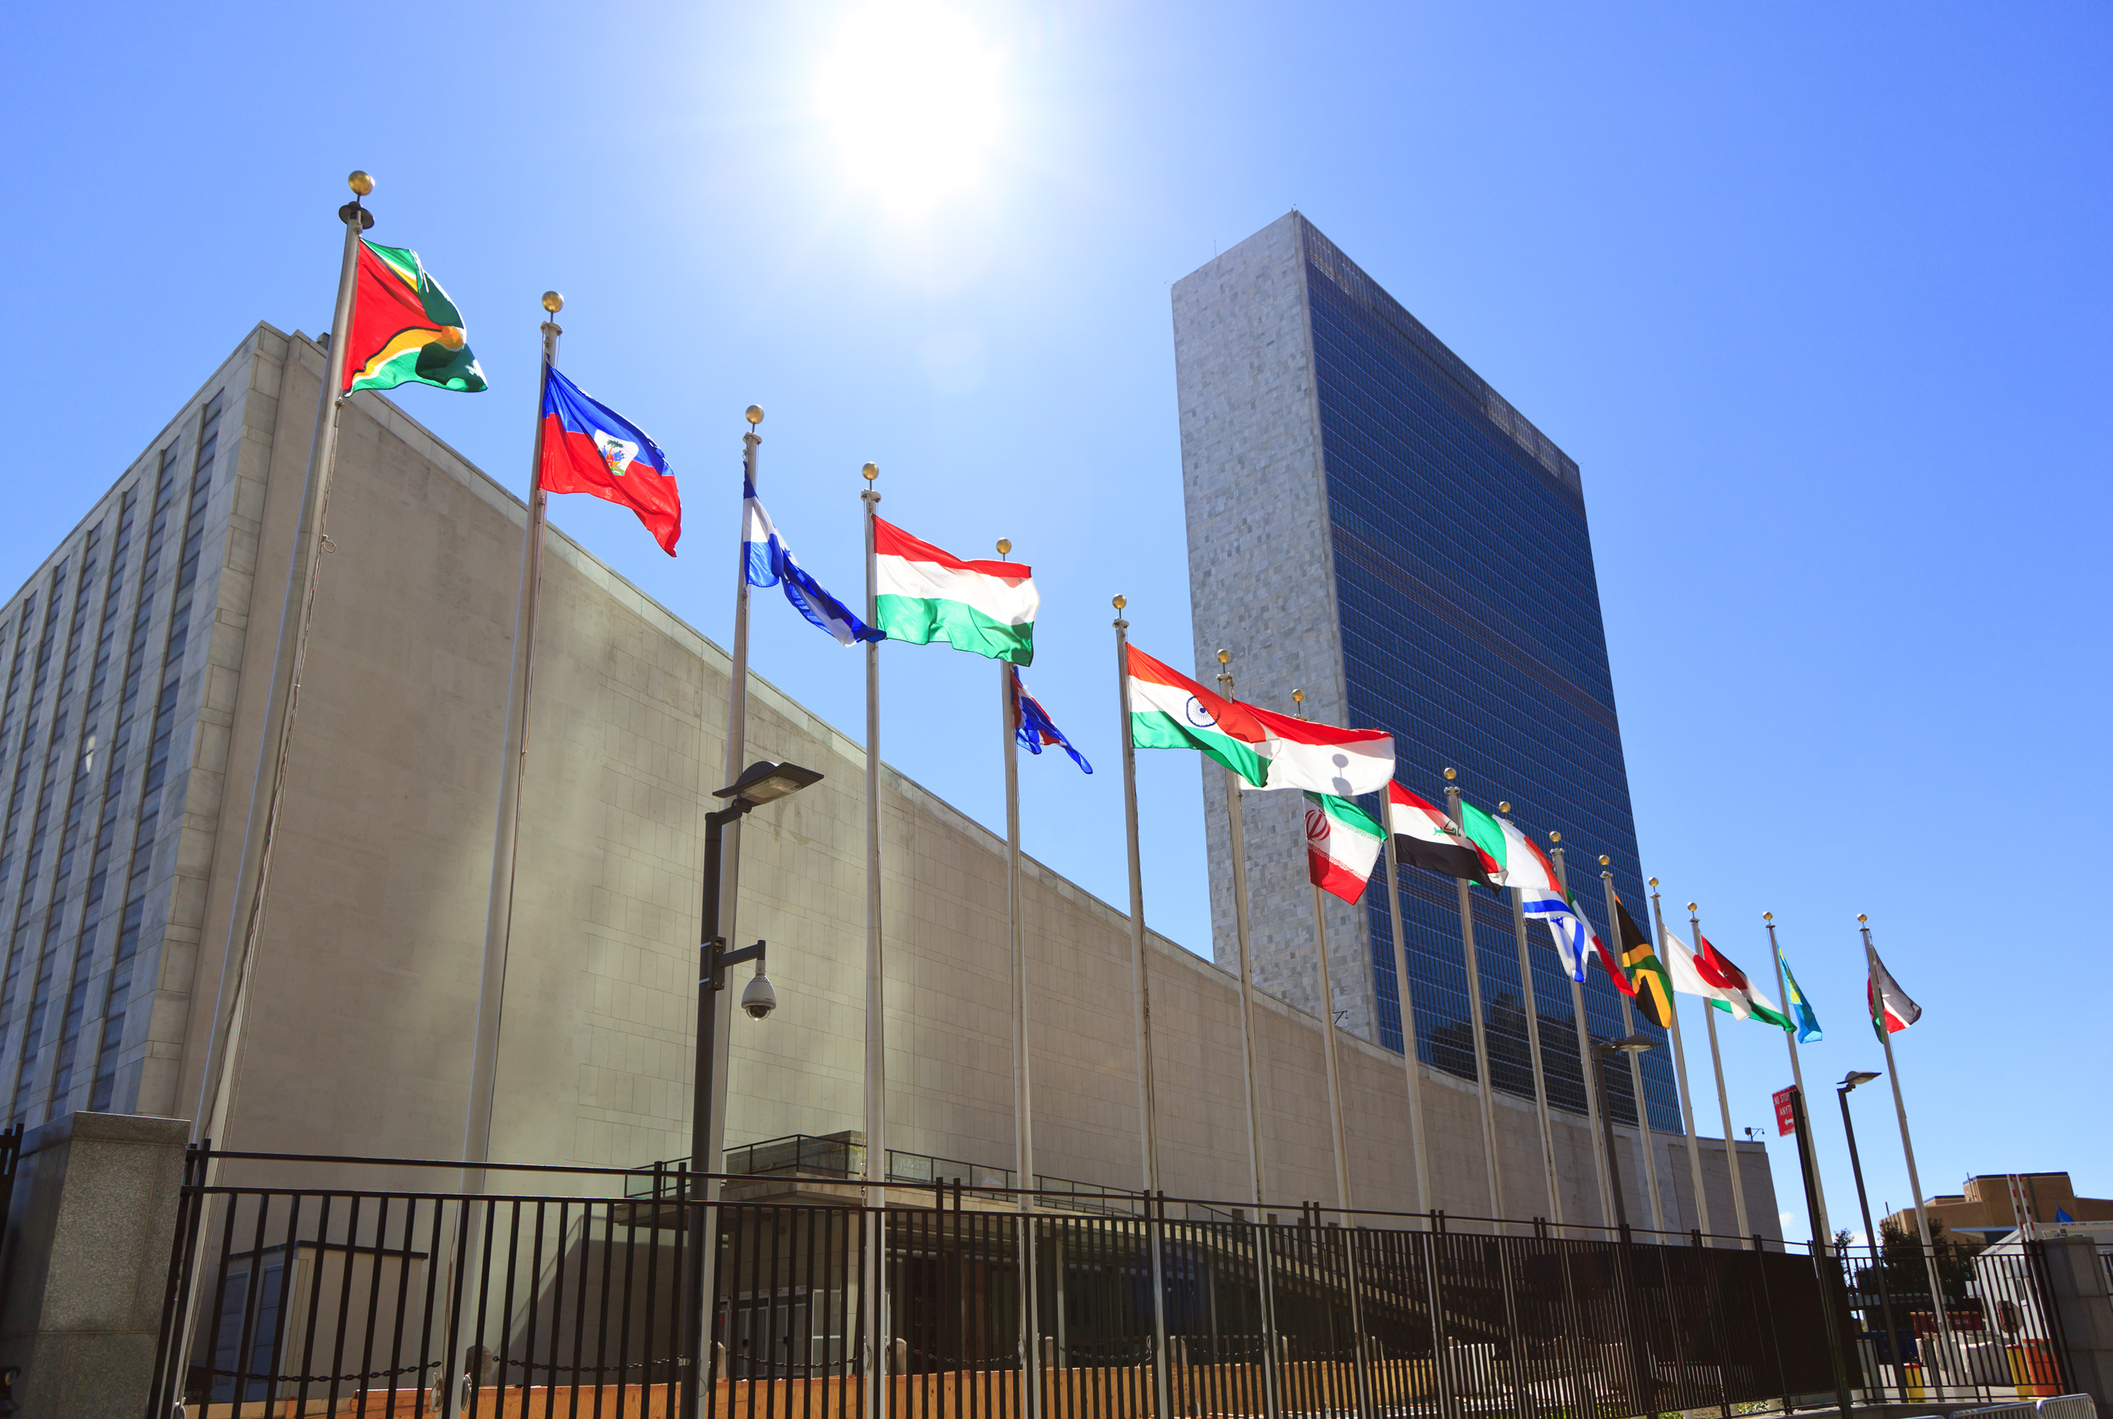 India's two-year term term as the non-permanent member of the UNSC would begin from January 1, 2021.

